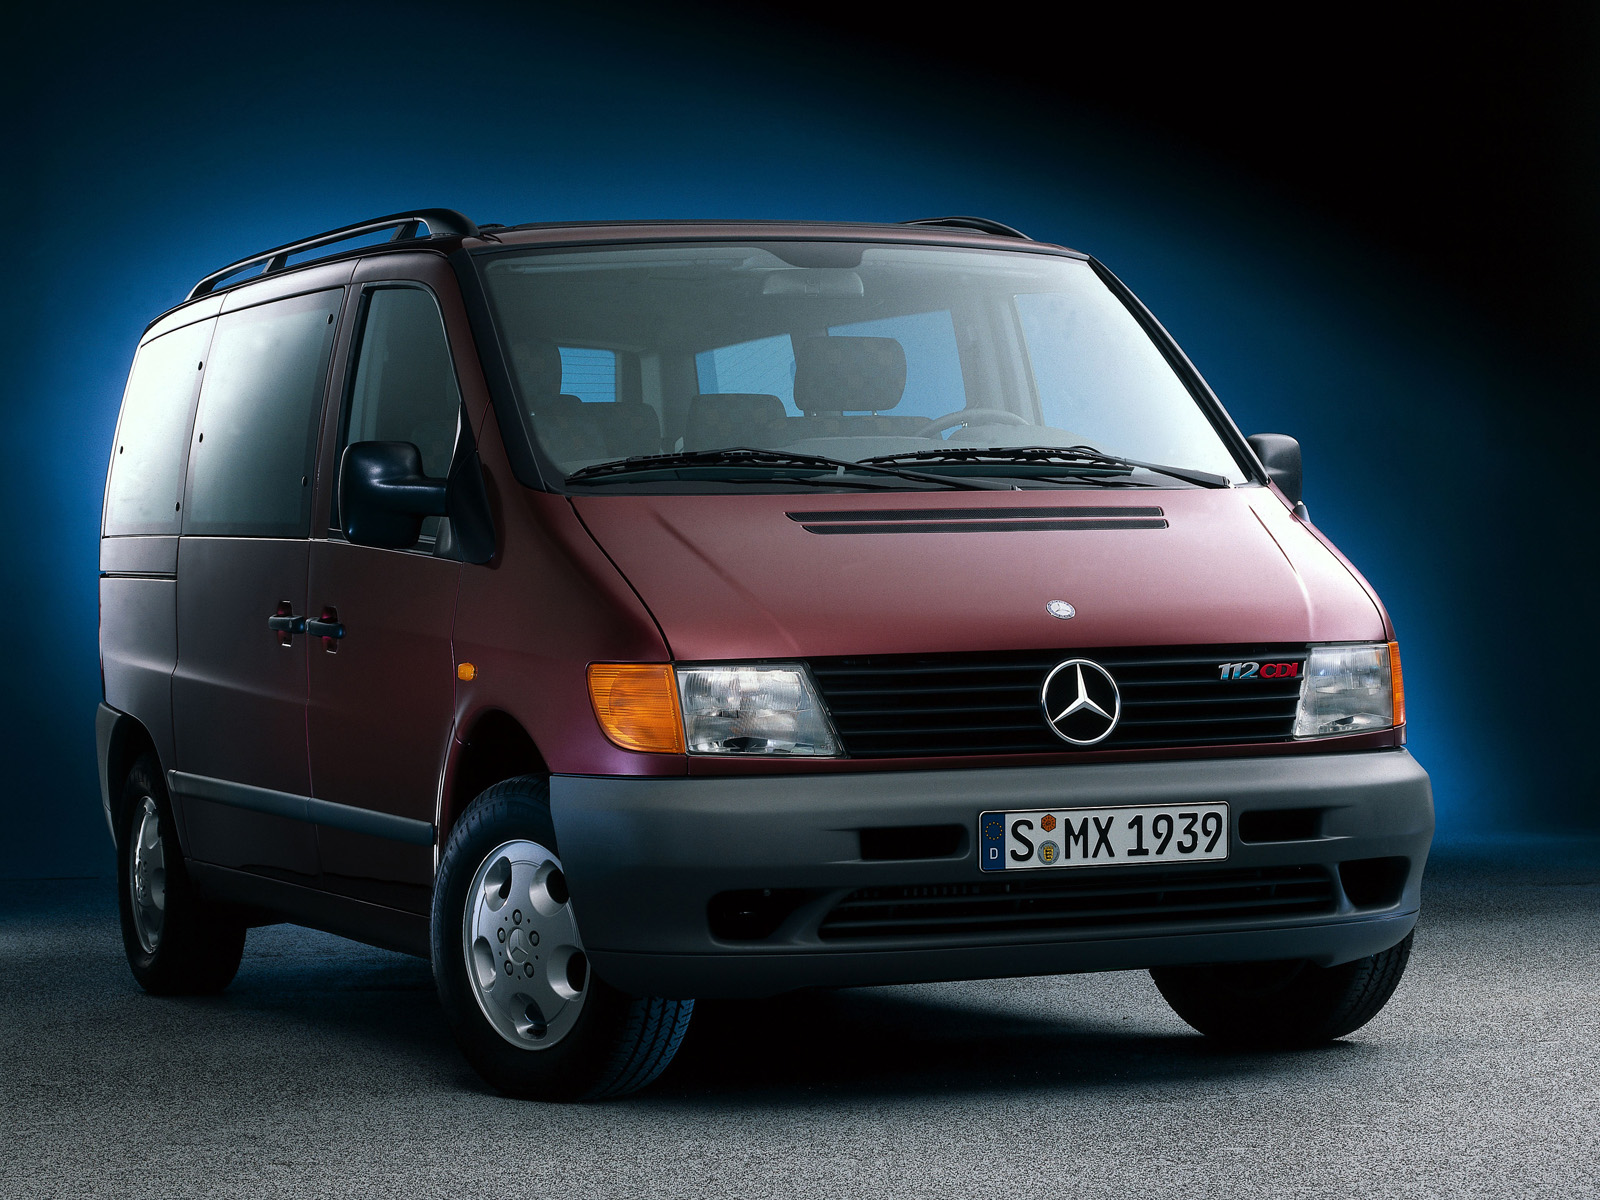 Mercedes-Benz Vito 120 2003 - Technical specifications